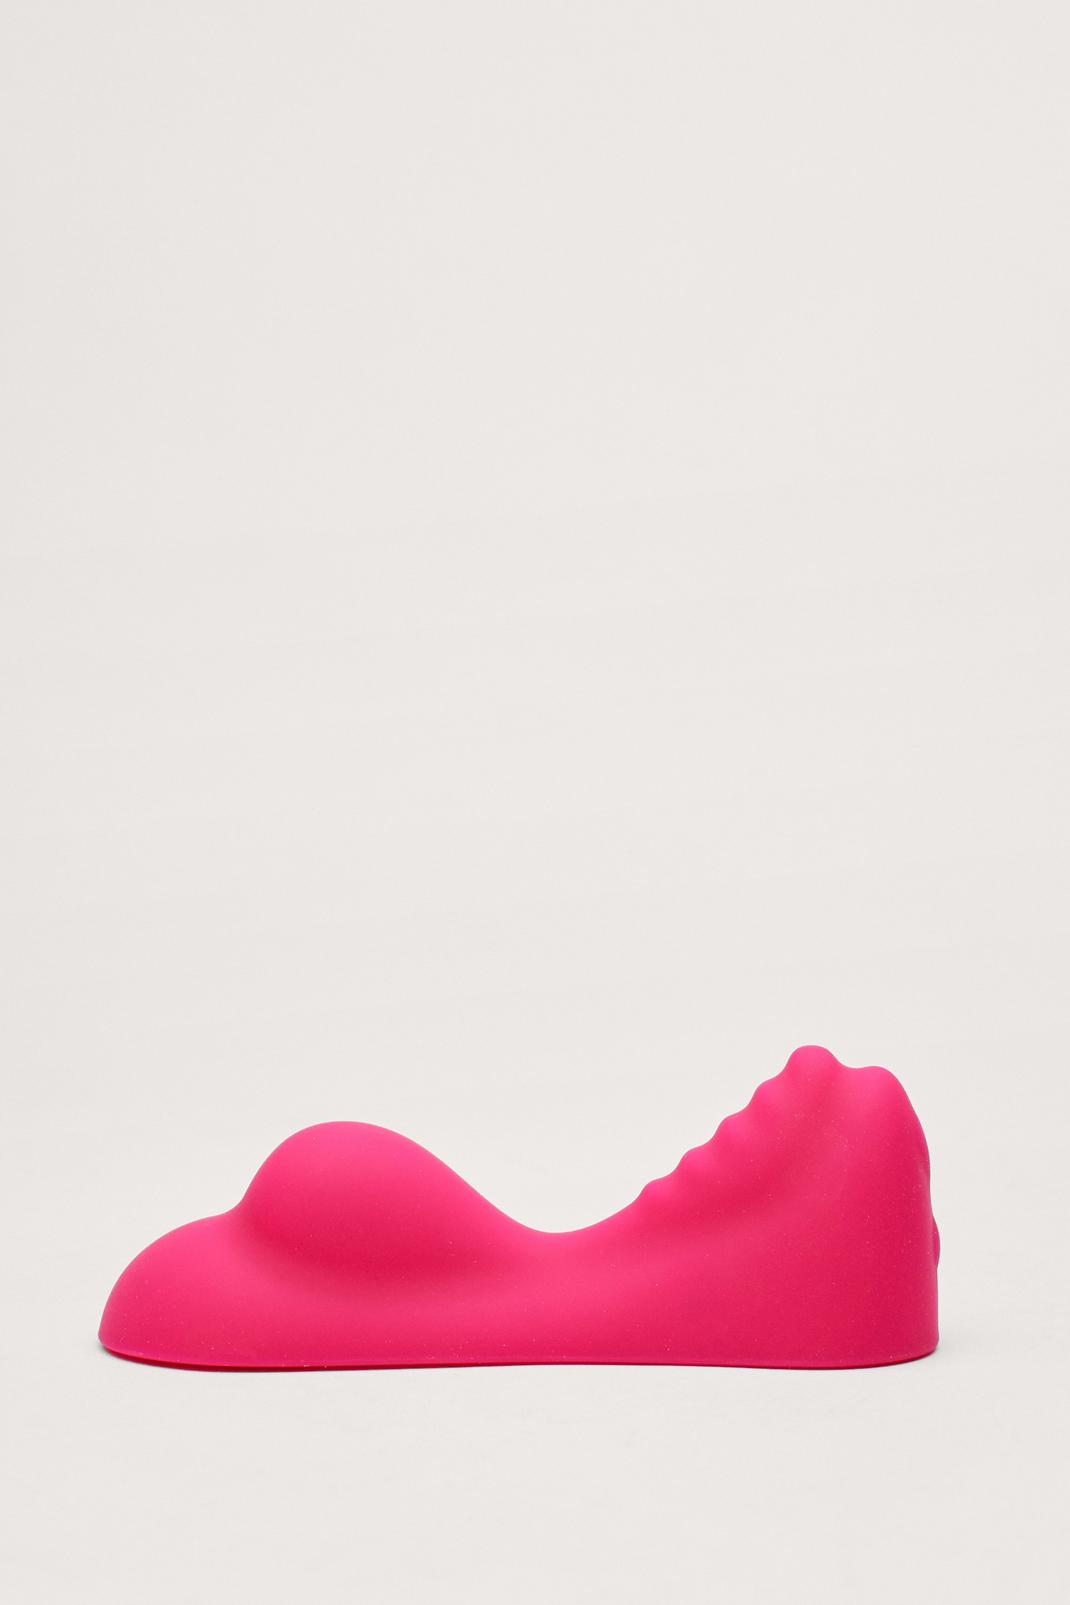 Hot pink Silicone 10 Speed Non Penetrative Sit On Vibrator Sex Toy image number 1